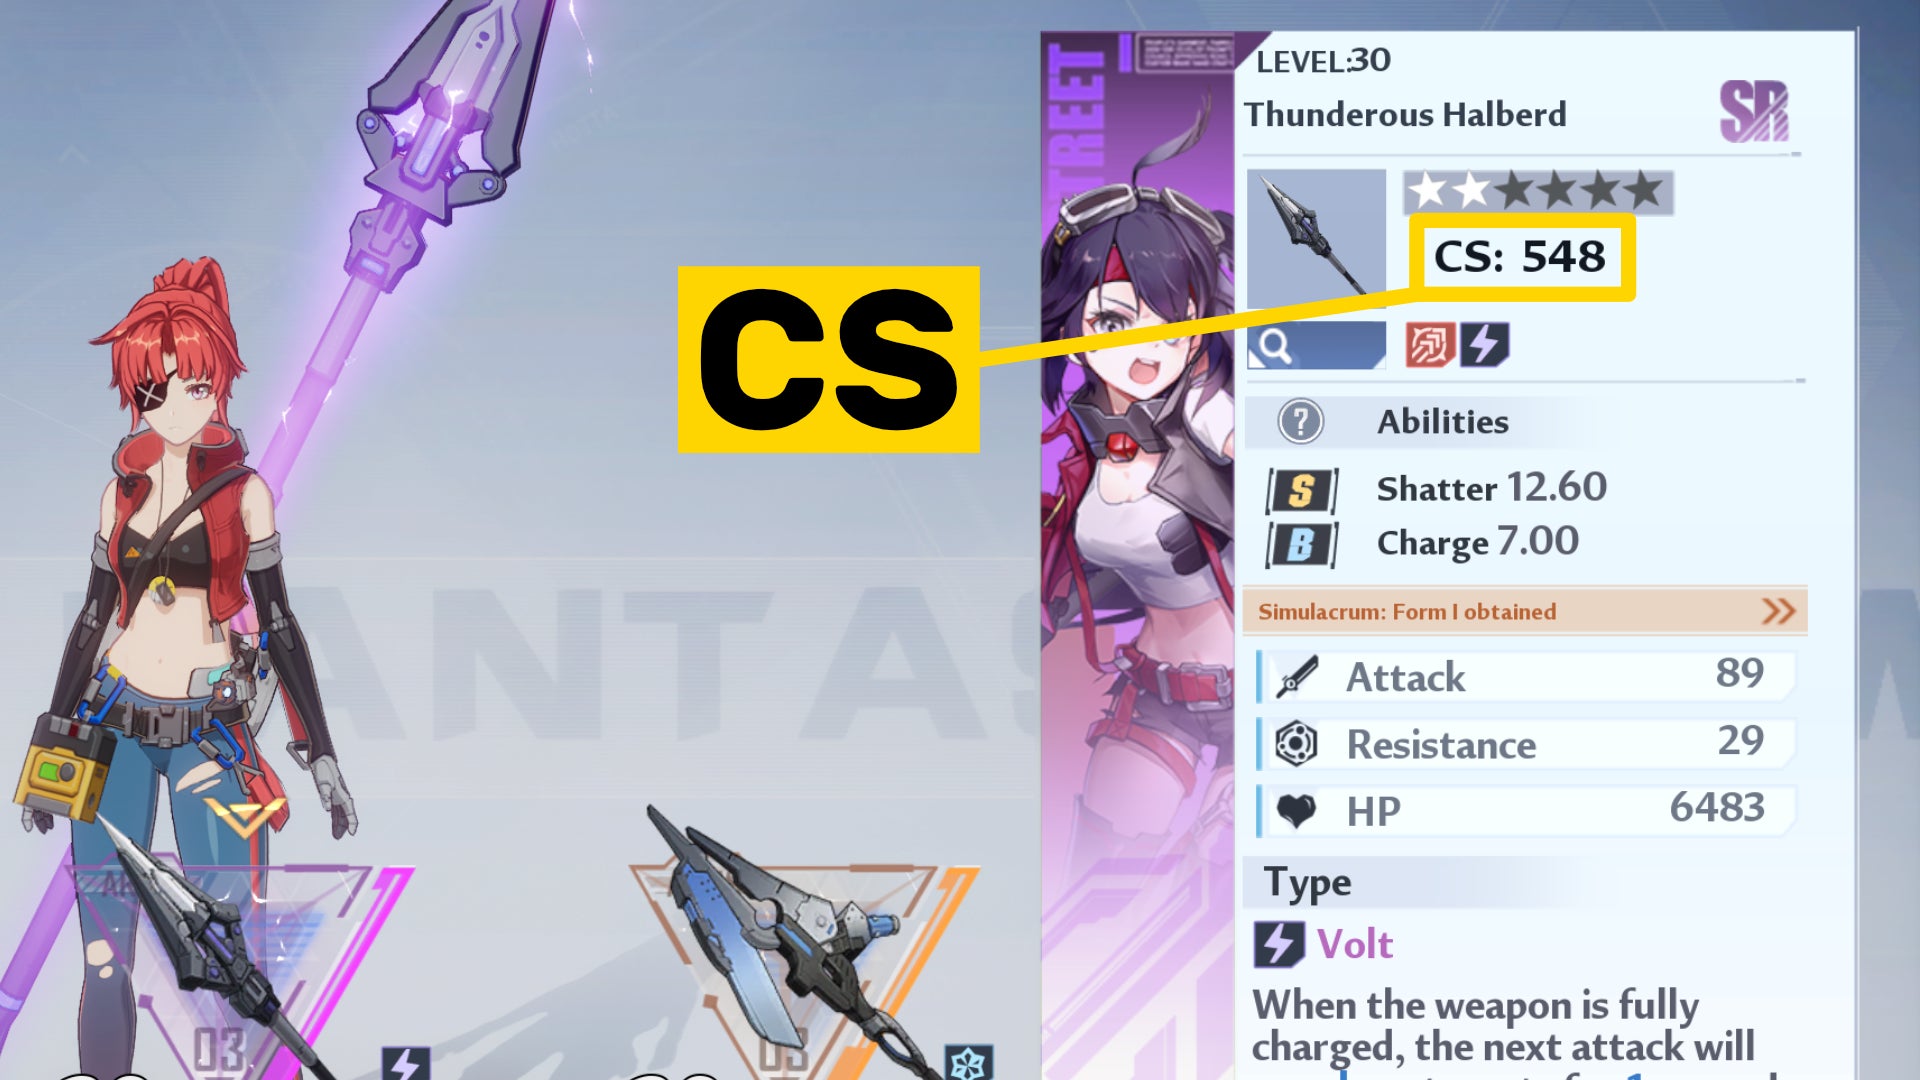 Part of the Tower Of Fantasy weapon screen showcasing the Thunderous Halberd weapon. A yellow annotation marks the area where the weapon's CS stat is displayed.